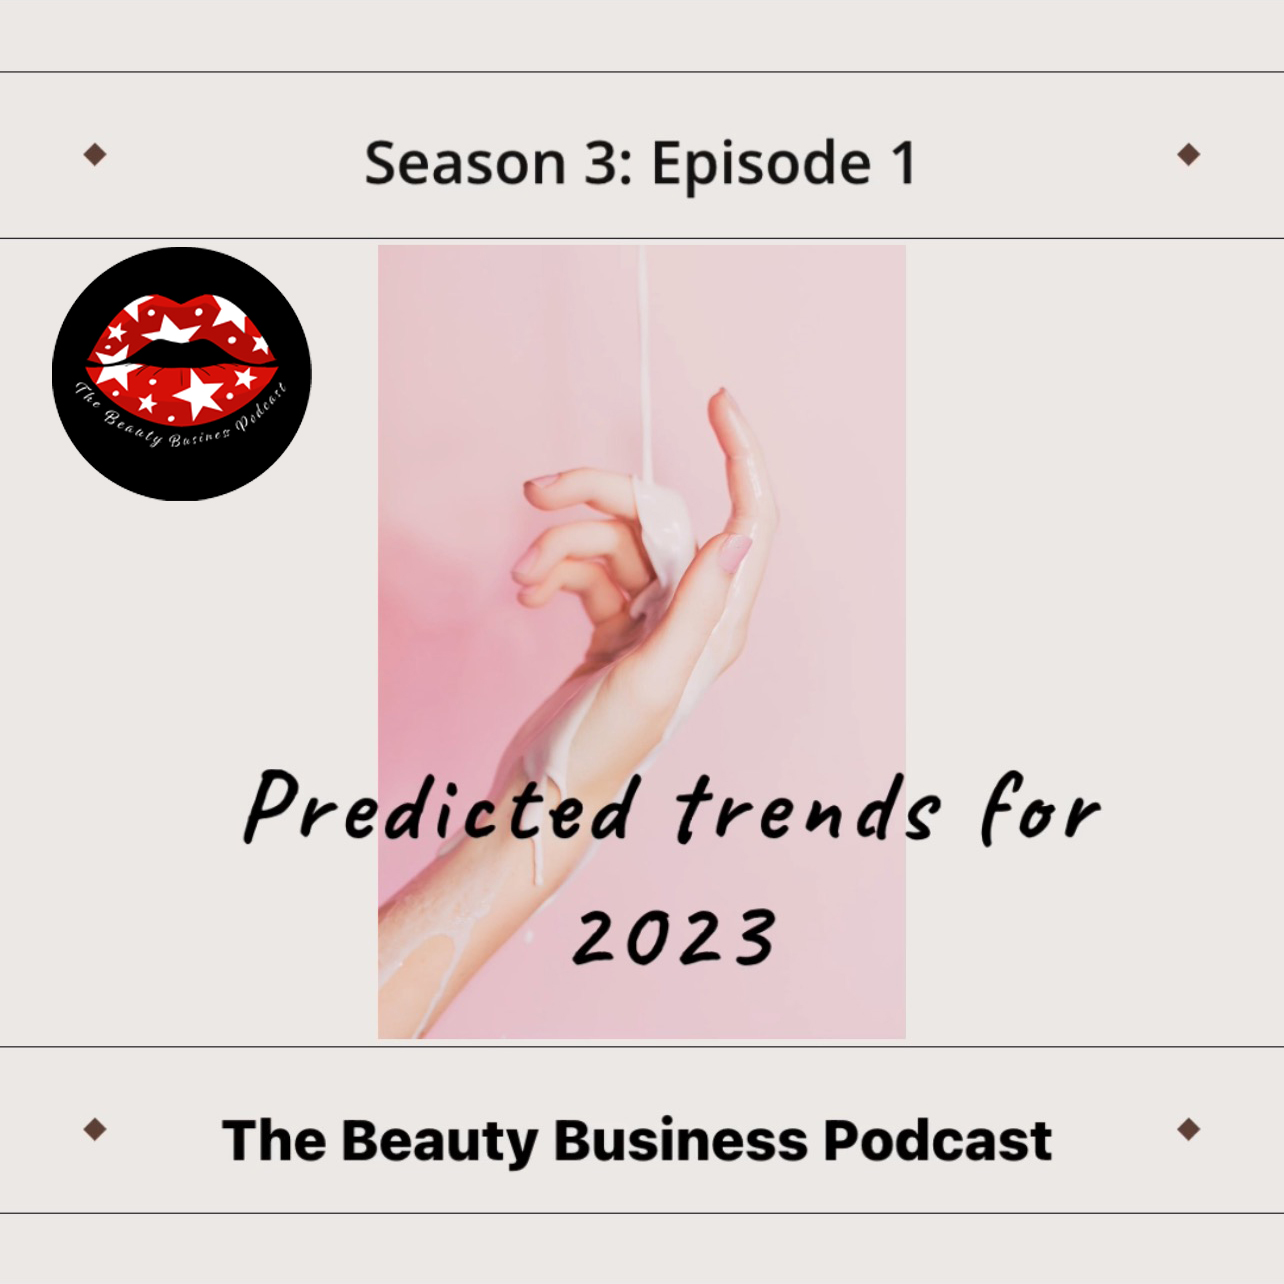 Season 3: Episode 1 - Predicted Trends for 2023